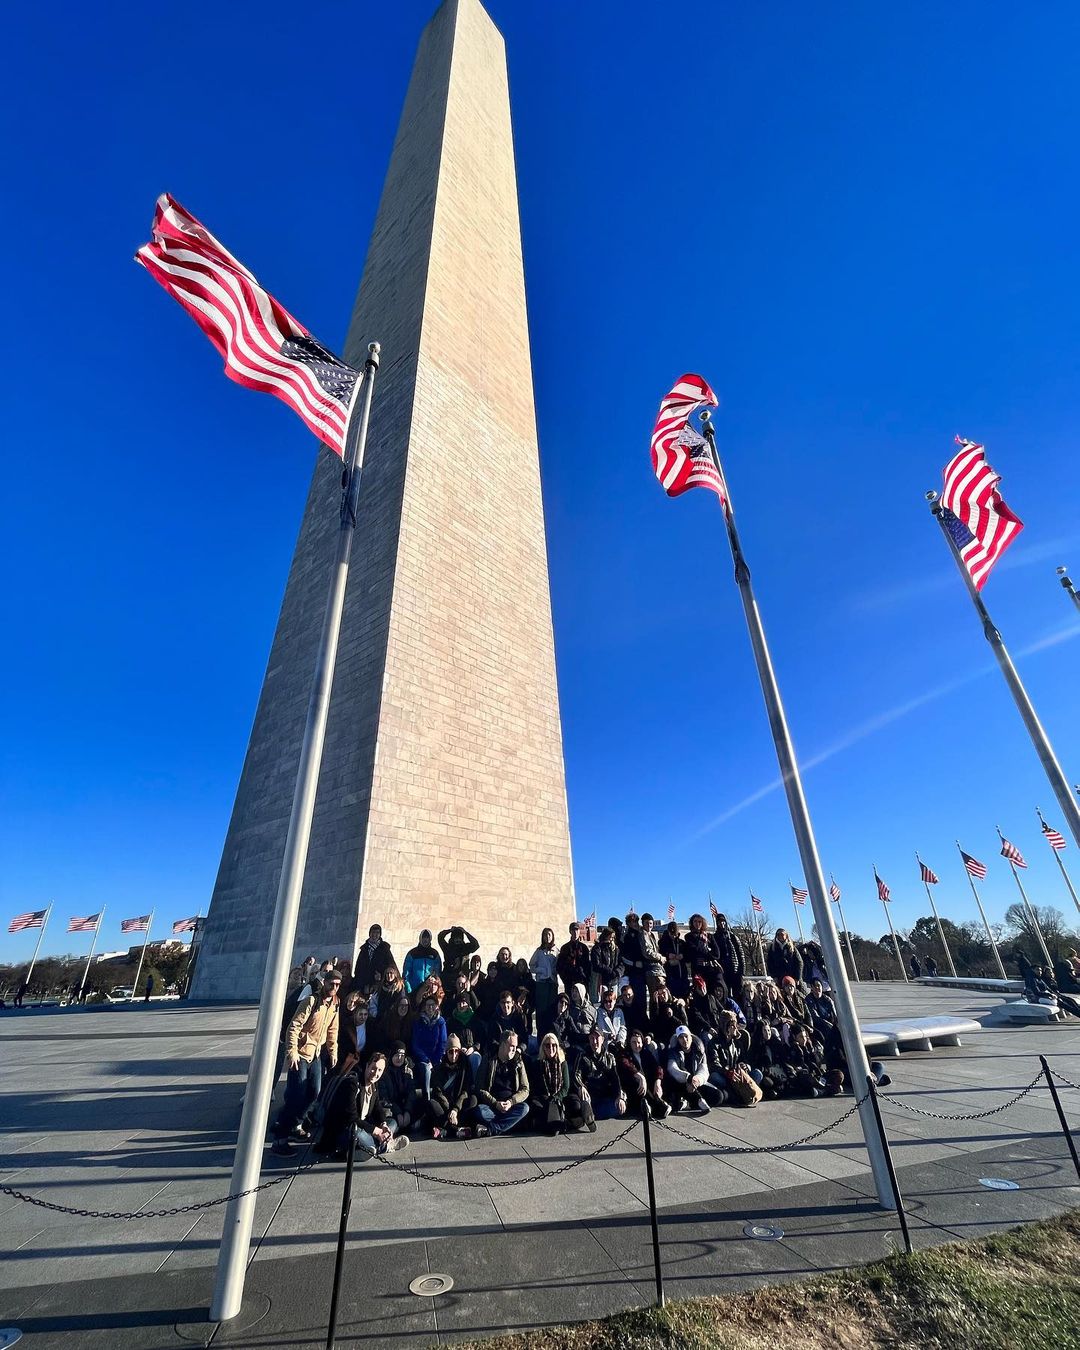 Students and staff by the Washington Monument